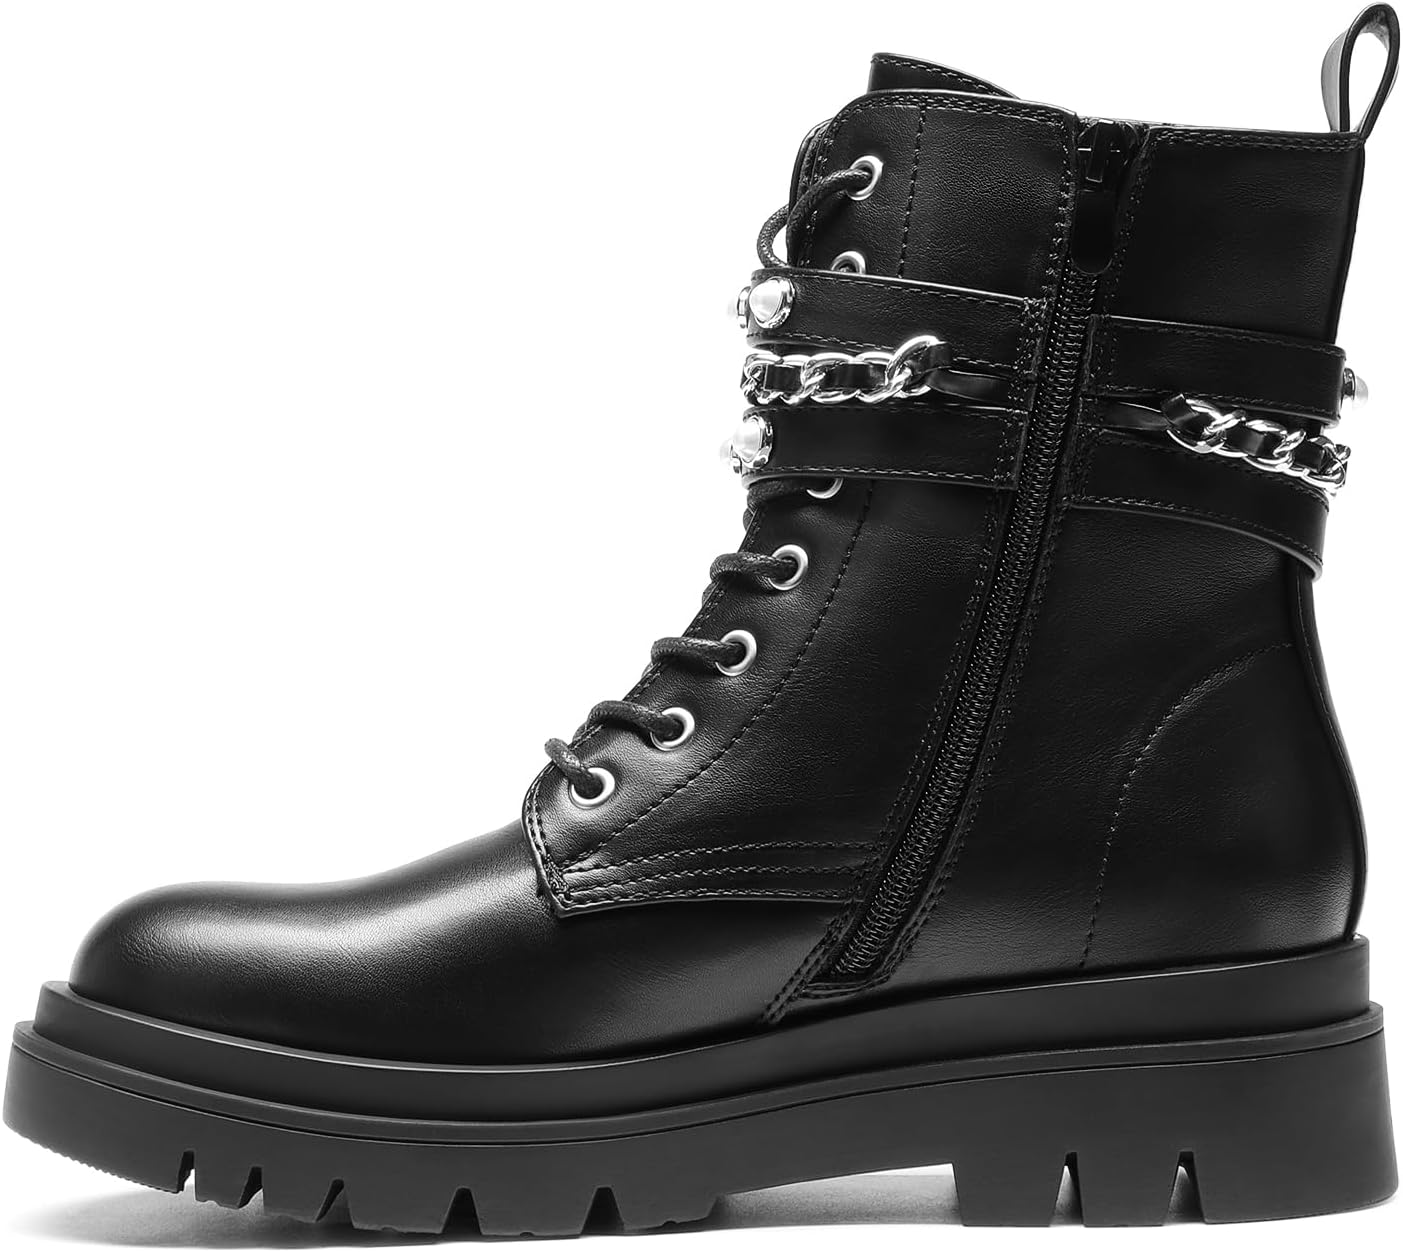 DREAM PAIRS Womens Fashion Platform Combat Boots Lace Up Lug Sole Goth Ankle Booties Shoes